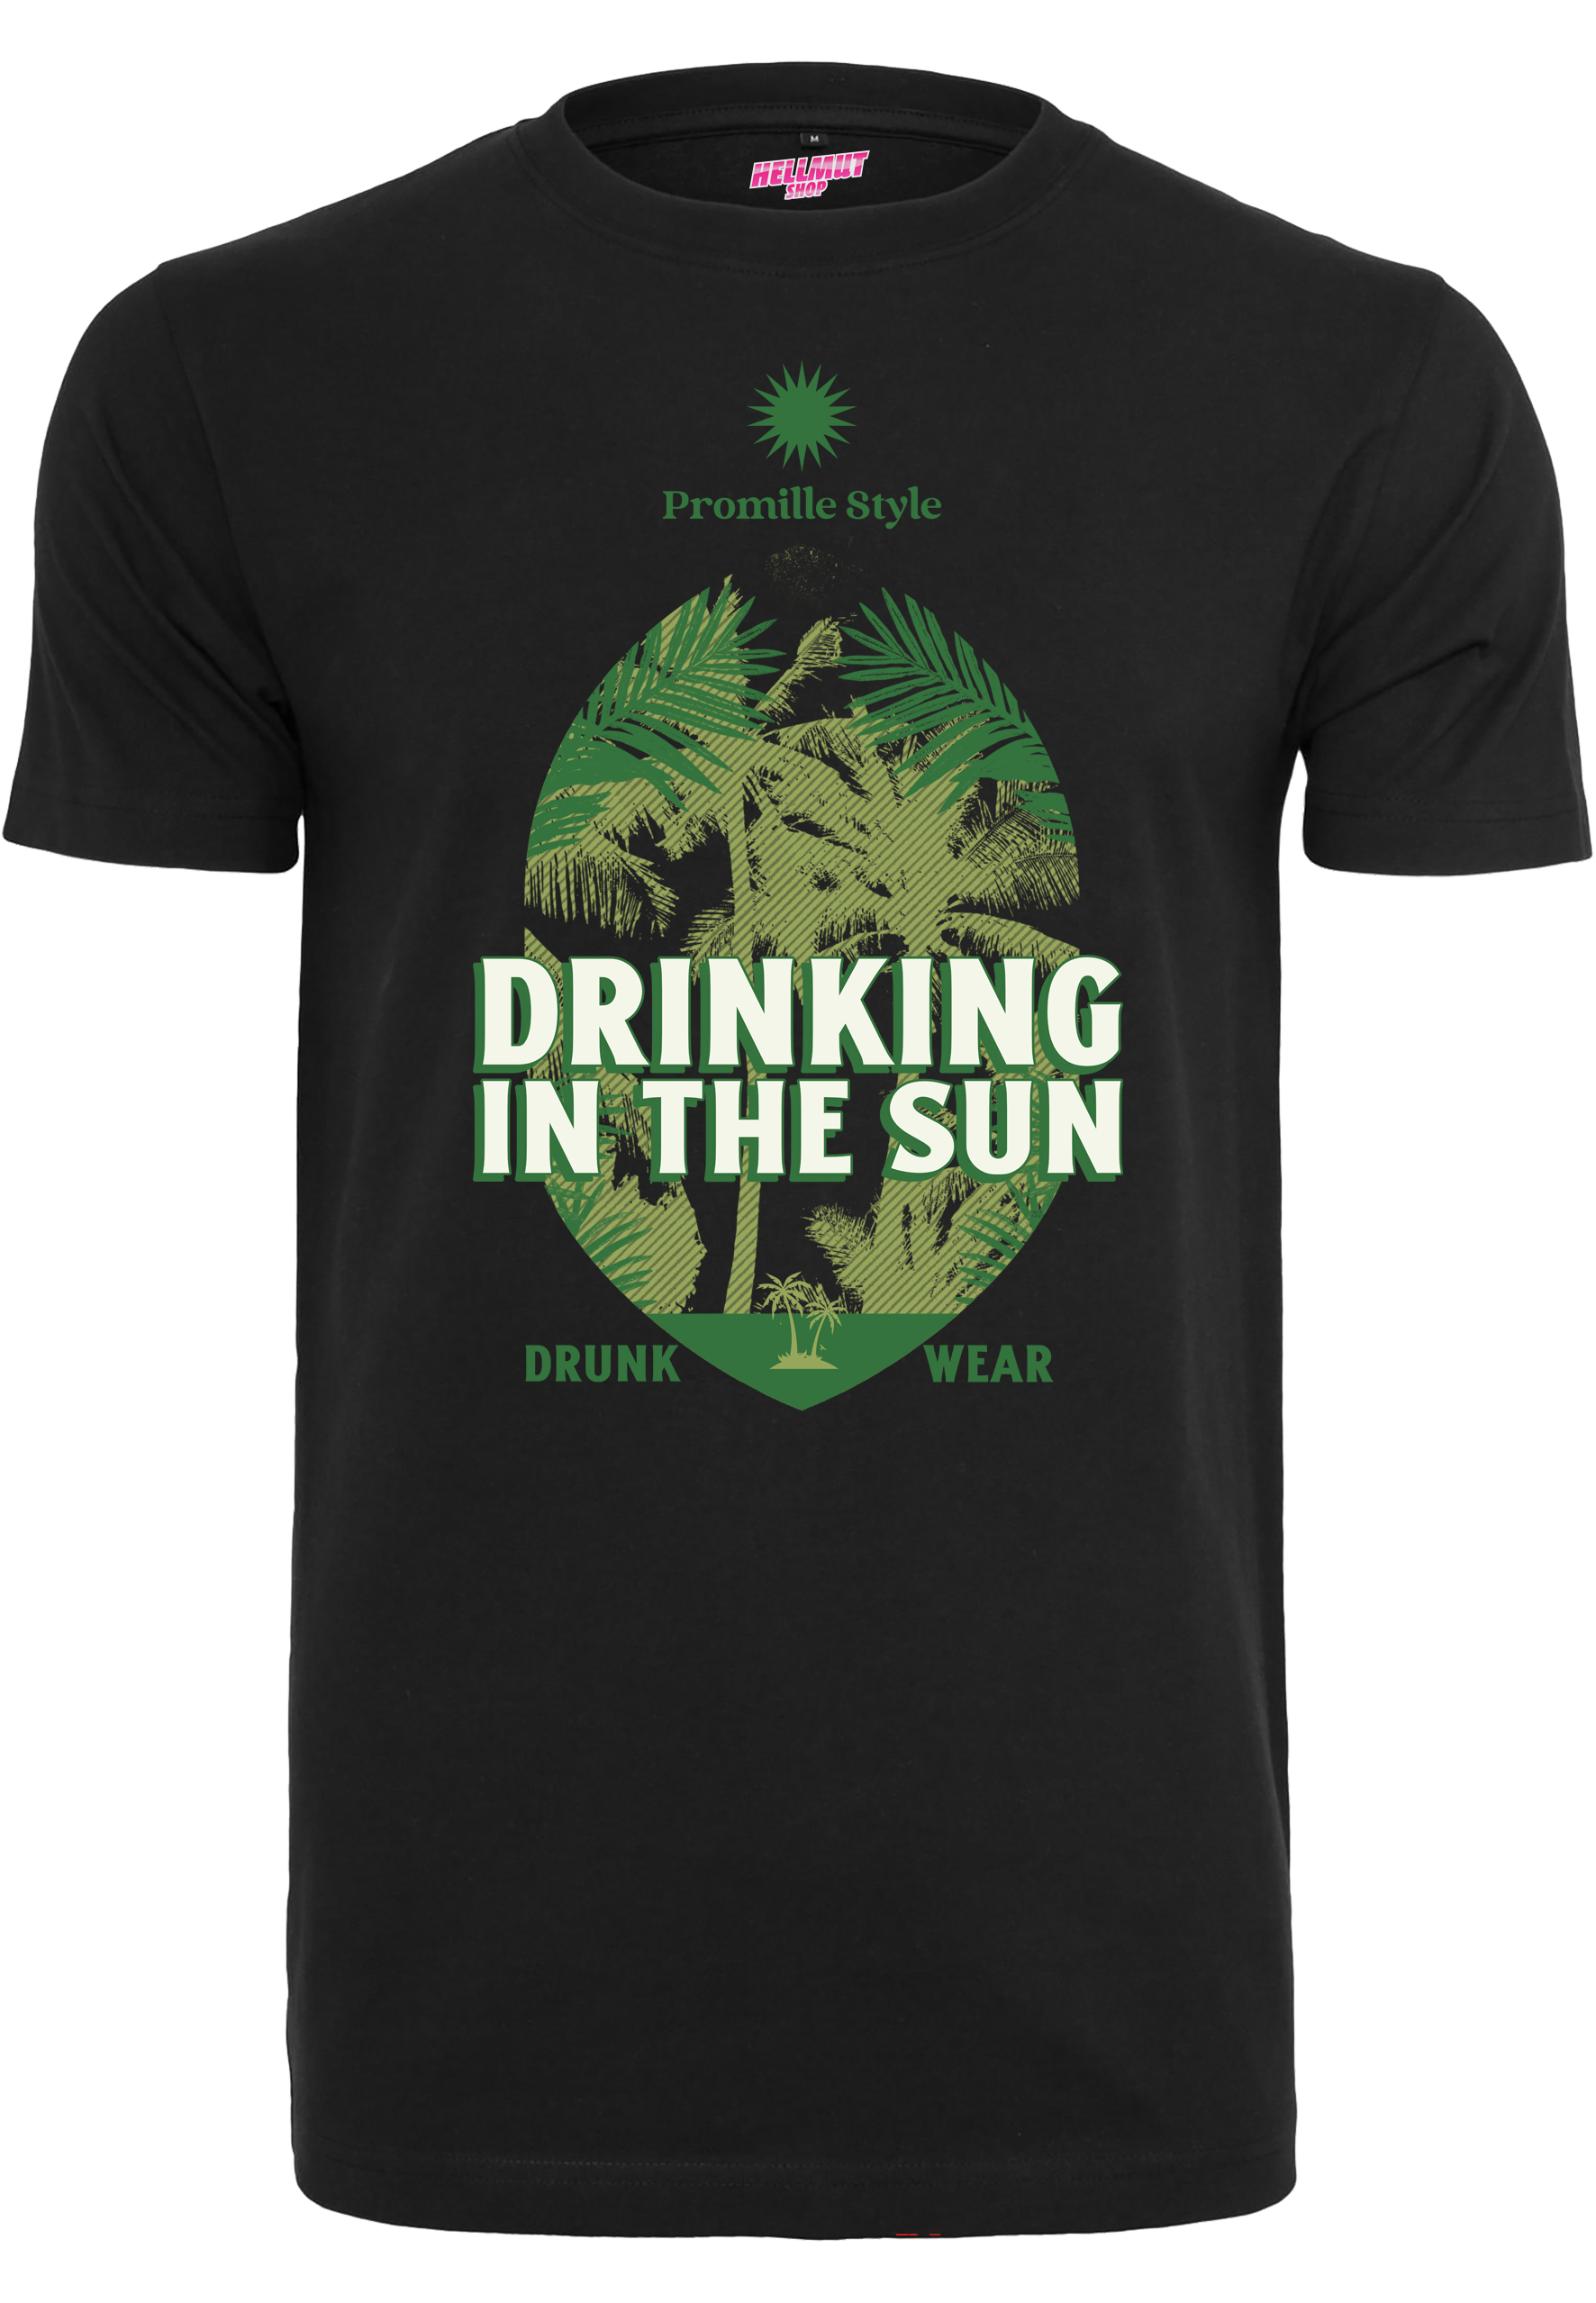 Promille Style - Drinking in the Sun Shirt [black]